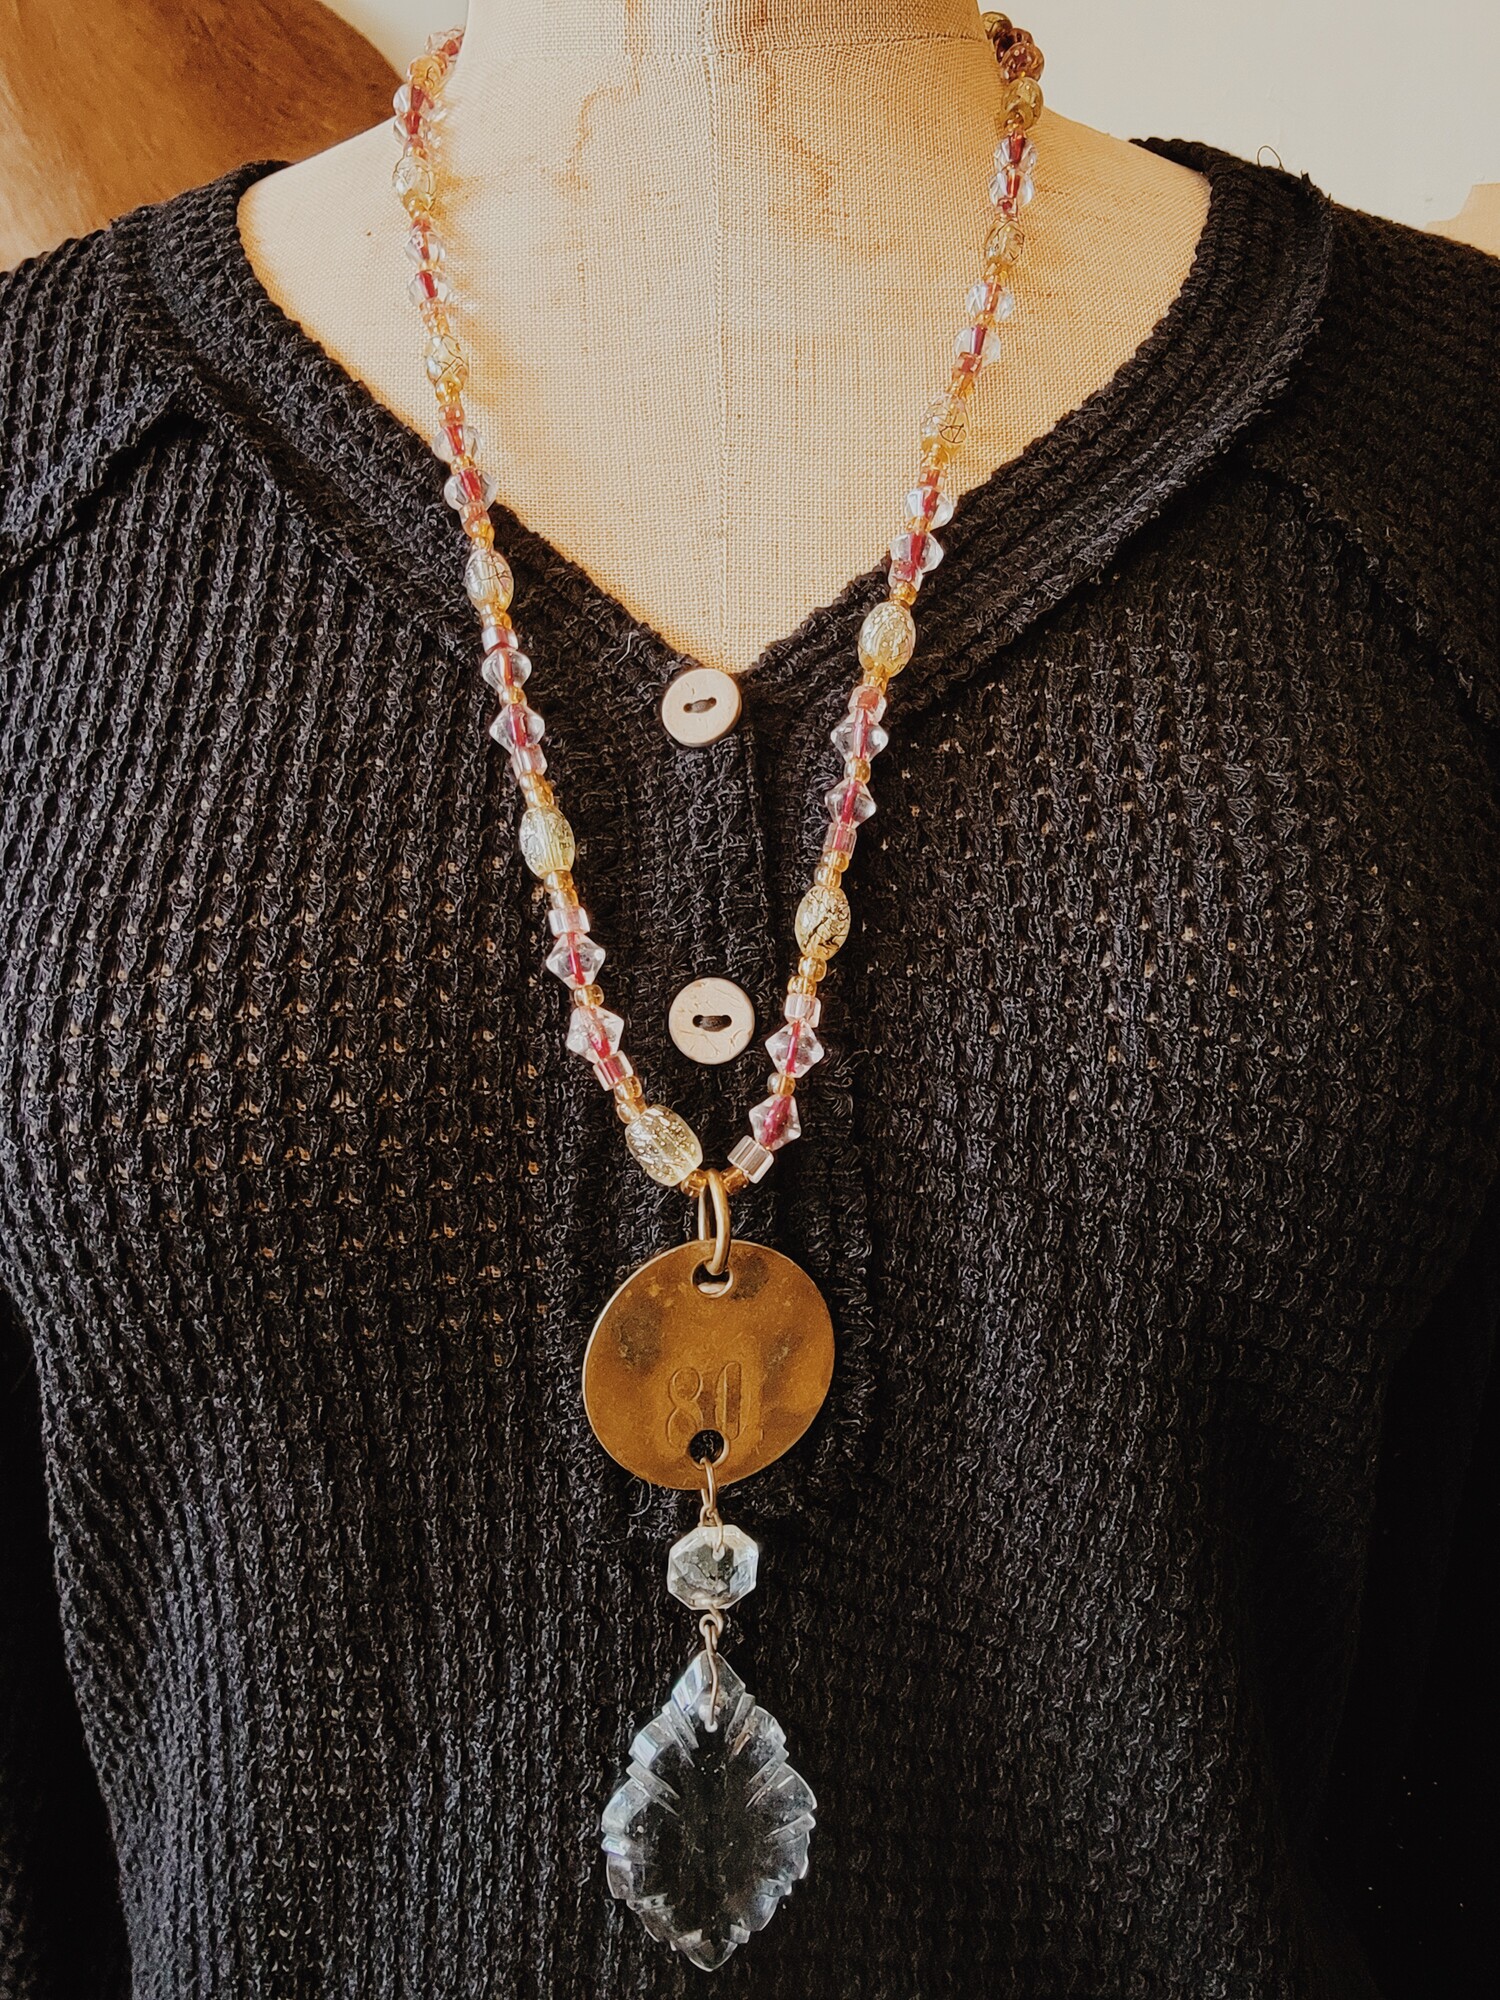 This one of a kind necklace is on a strand with a variety of pink, clear, and yellow beads. It has a circle brass plate as a pendant with 80 engraved in it and a crystal hanging from that. The necklace strand is 28 inches.